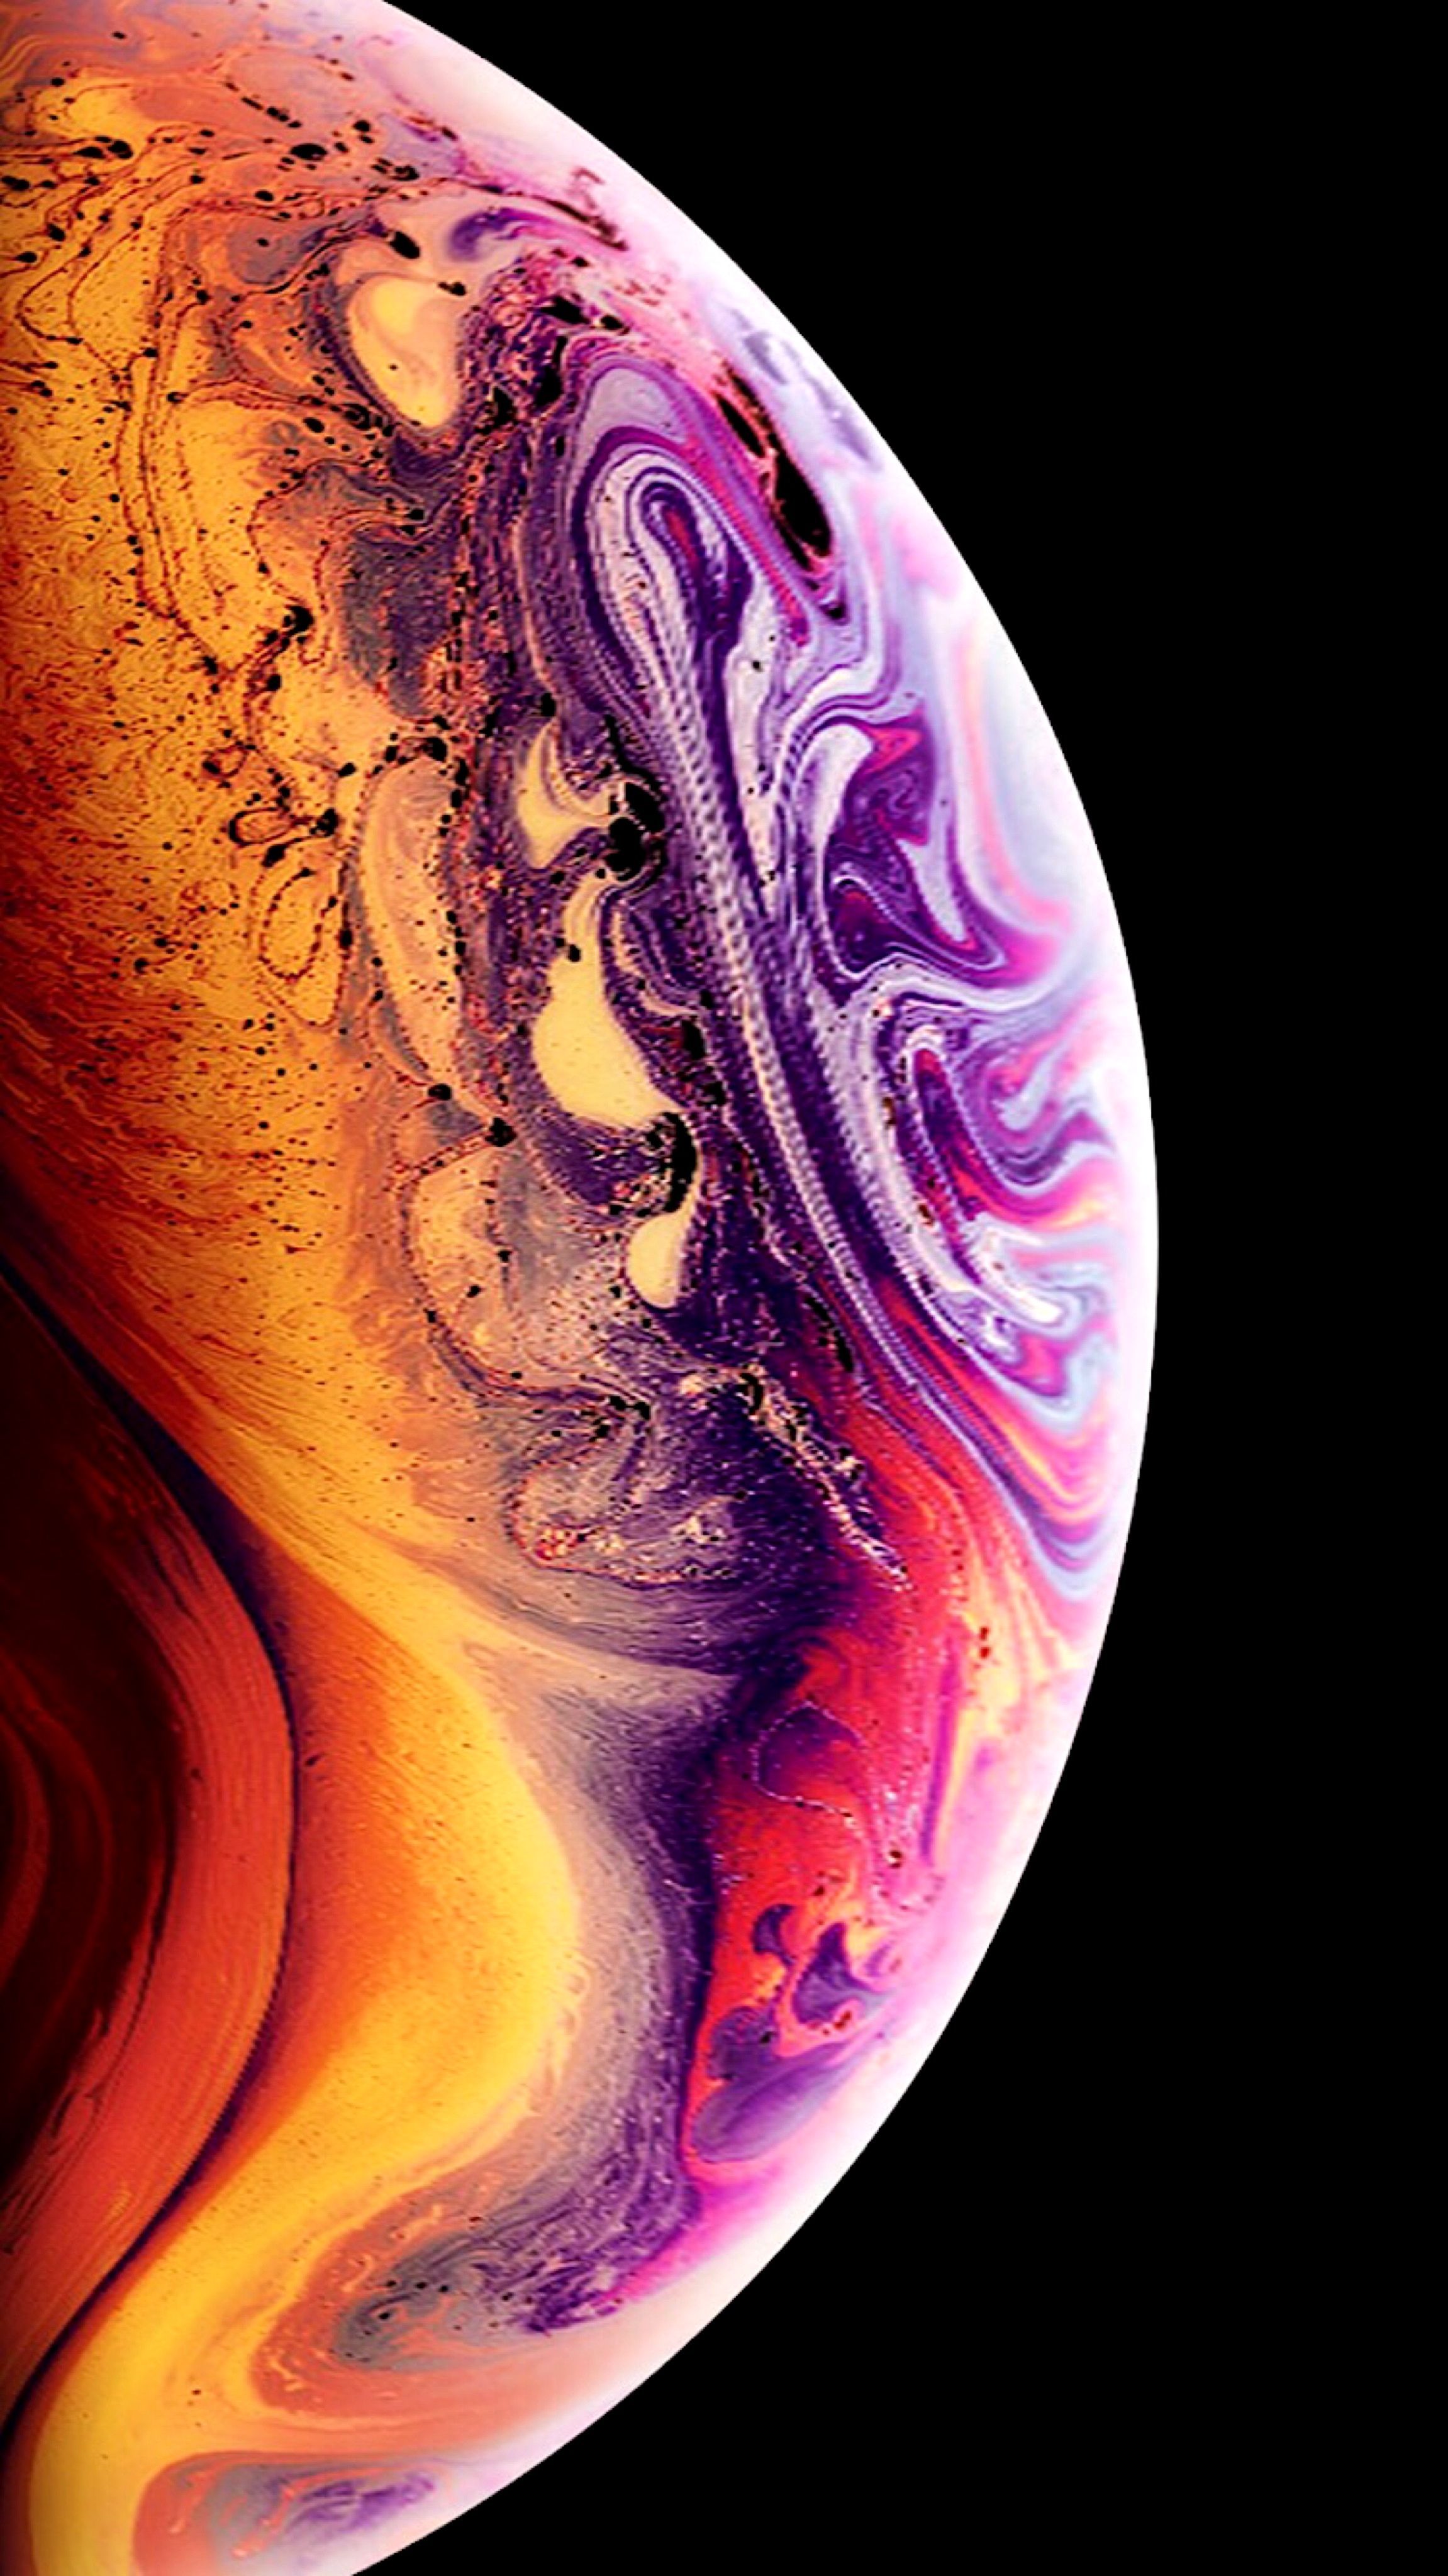 HDR 4k iPhone Wallpapers - Wallpaper Cave